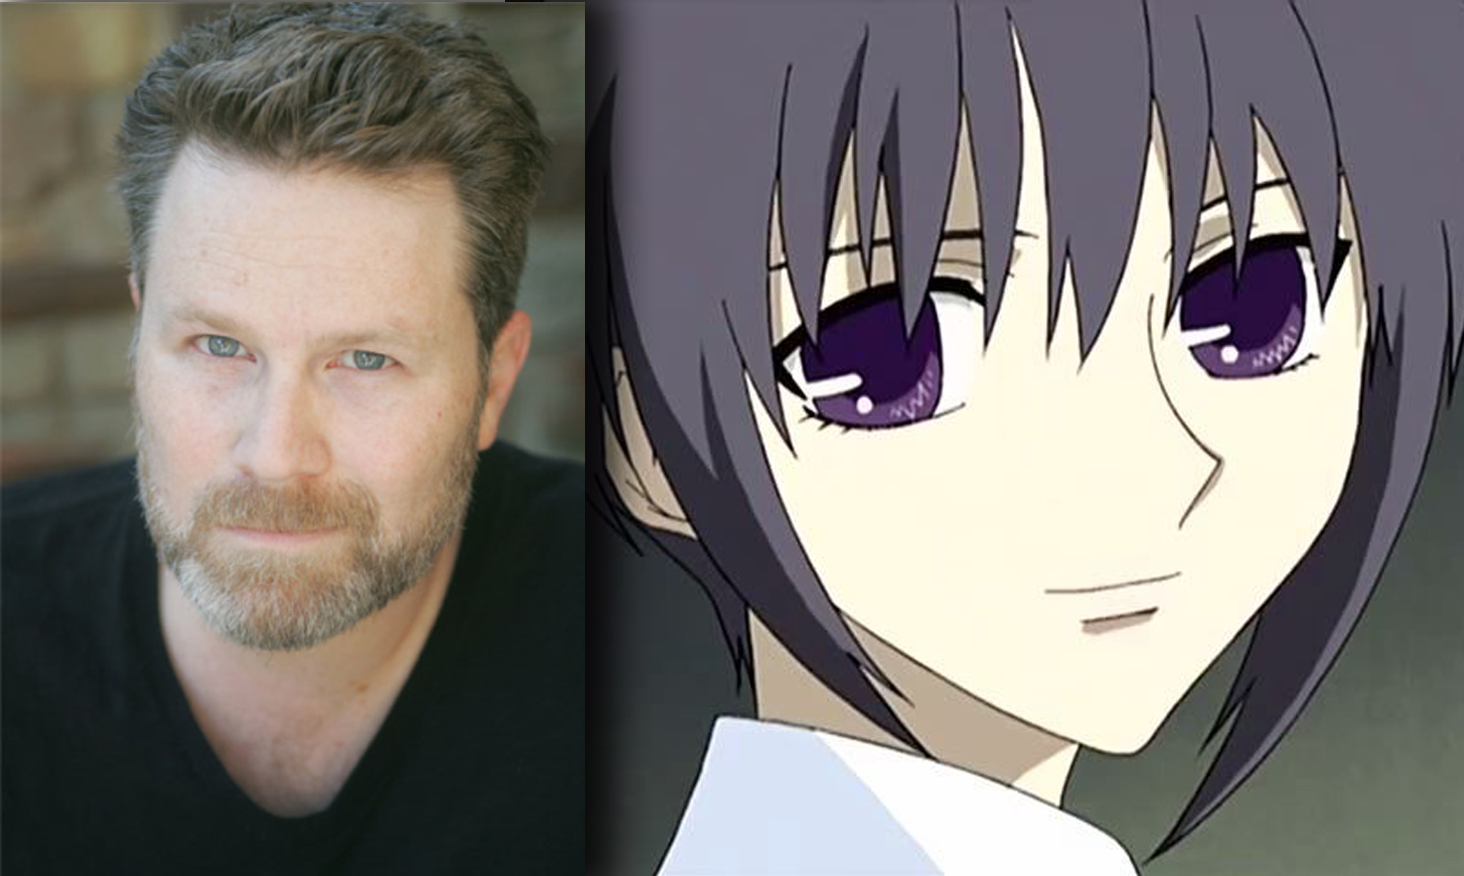 Ayame Soma Voice - Fruits Basket (2019) (TV Show) - Behind The Voice Actors